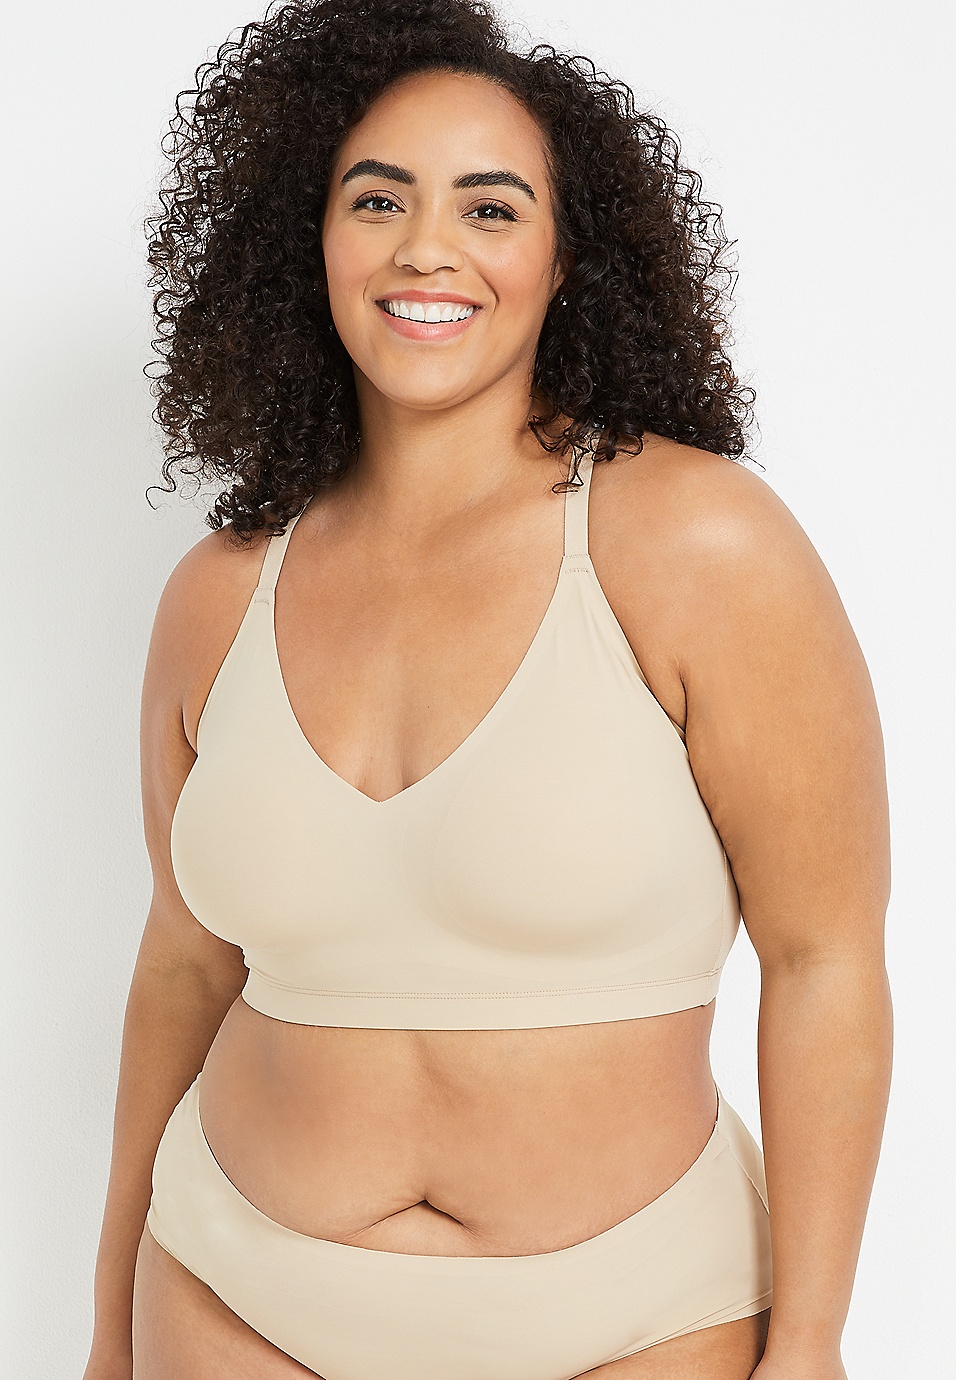 Bra Back Band Reducer Beige, Beige - 2 Row (2 Pieces), One Size :  : Clothing, Shoes & Accessories